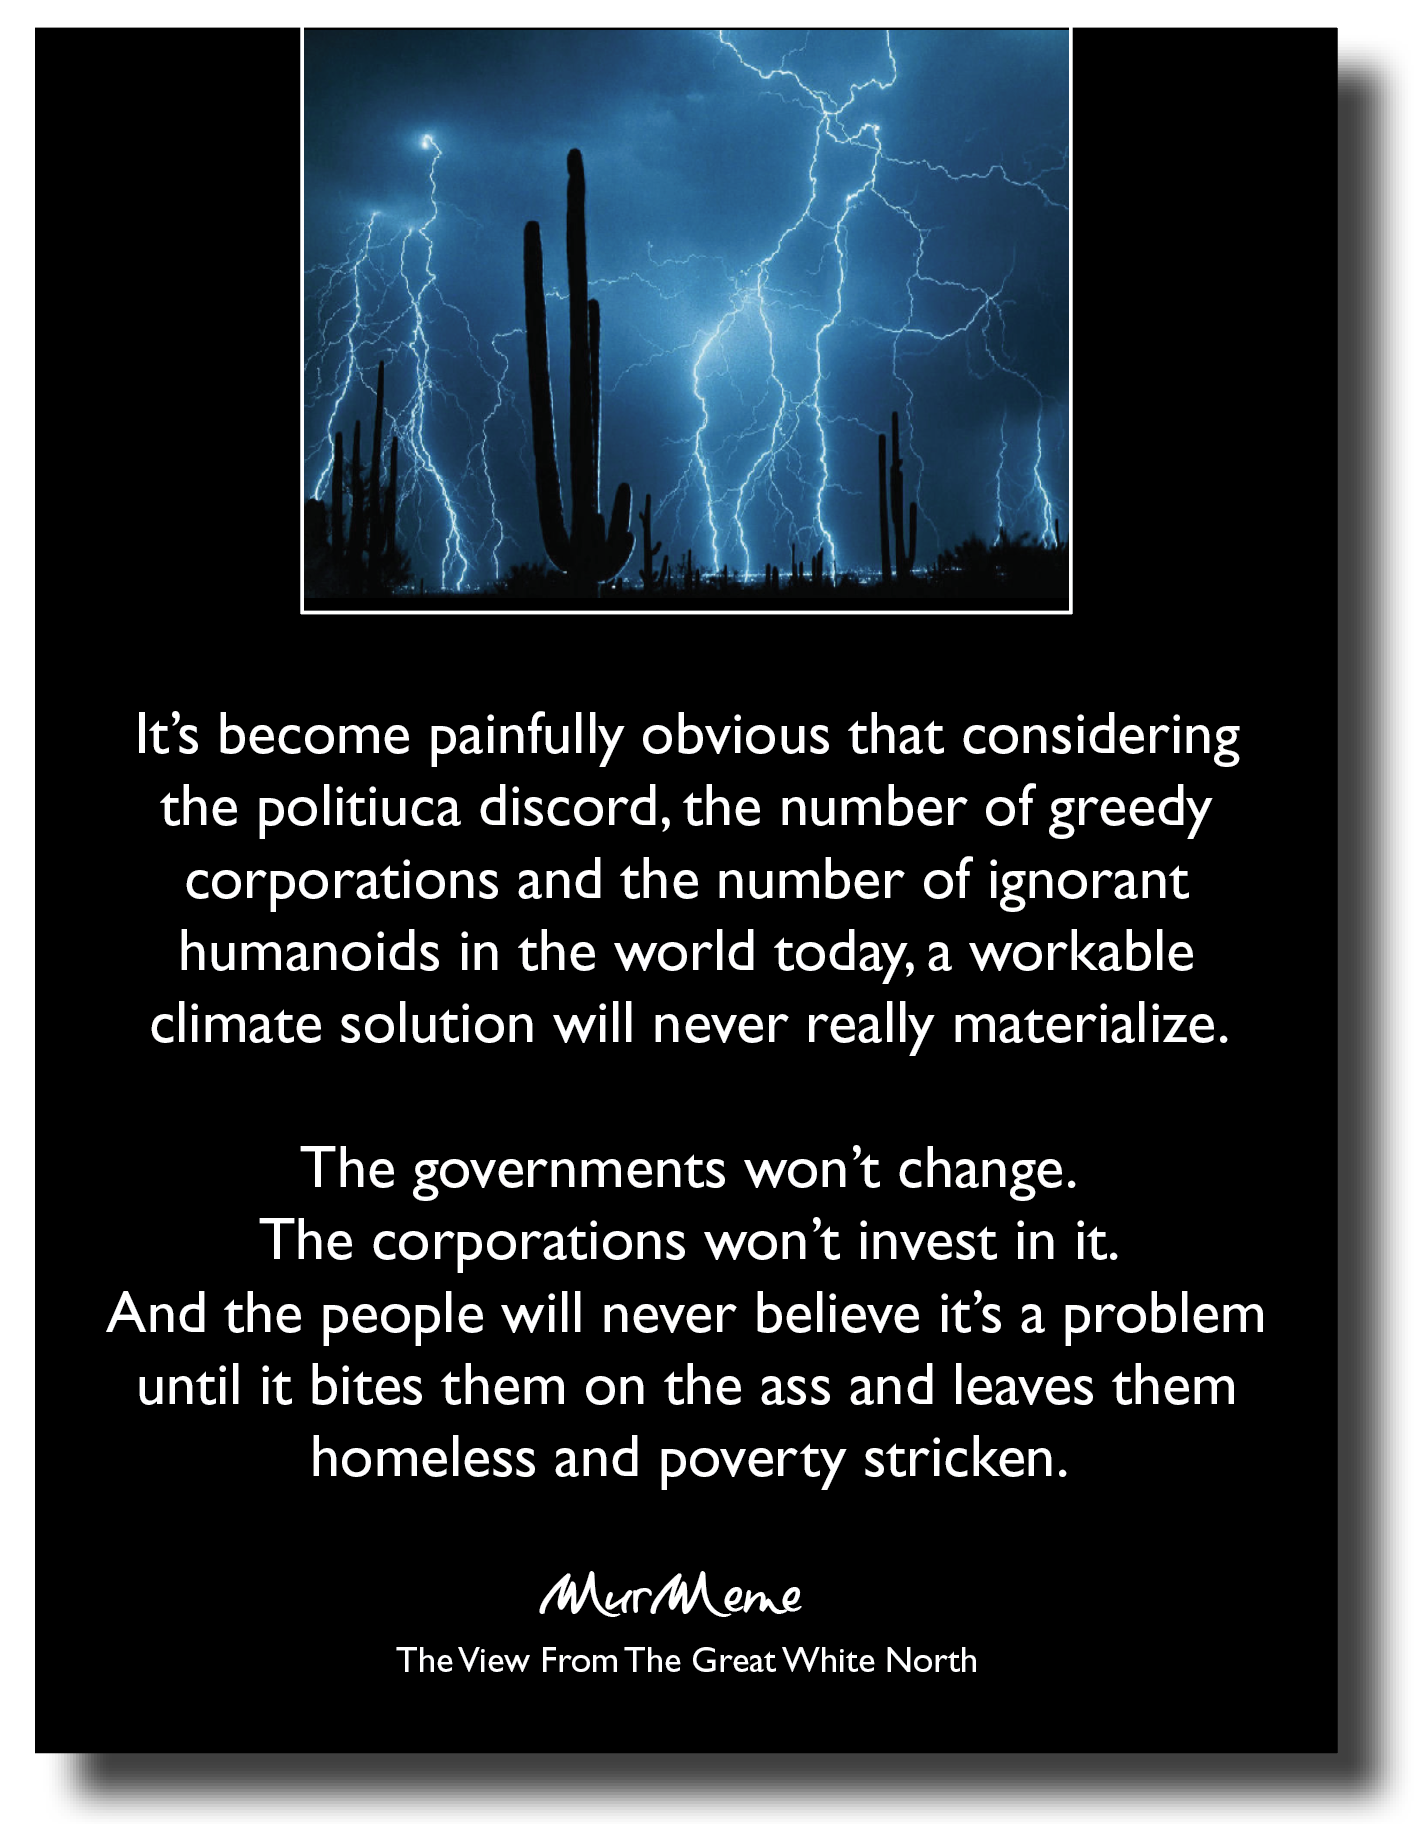 It's become painfully obvious that considering
the politiuca discord, the number of greedy
corporations and the number of ignorant
humanoids in the world today, a workable
climate solution will never really materialize.

The governments won't change.
The corporations won't invest in it.
And the people will never believe it’s a problem
until it bites them on the ass and leaves them
homeless and poverty stricken.

VO ON

The View From The Great White North